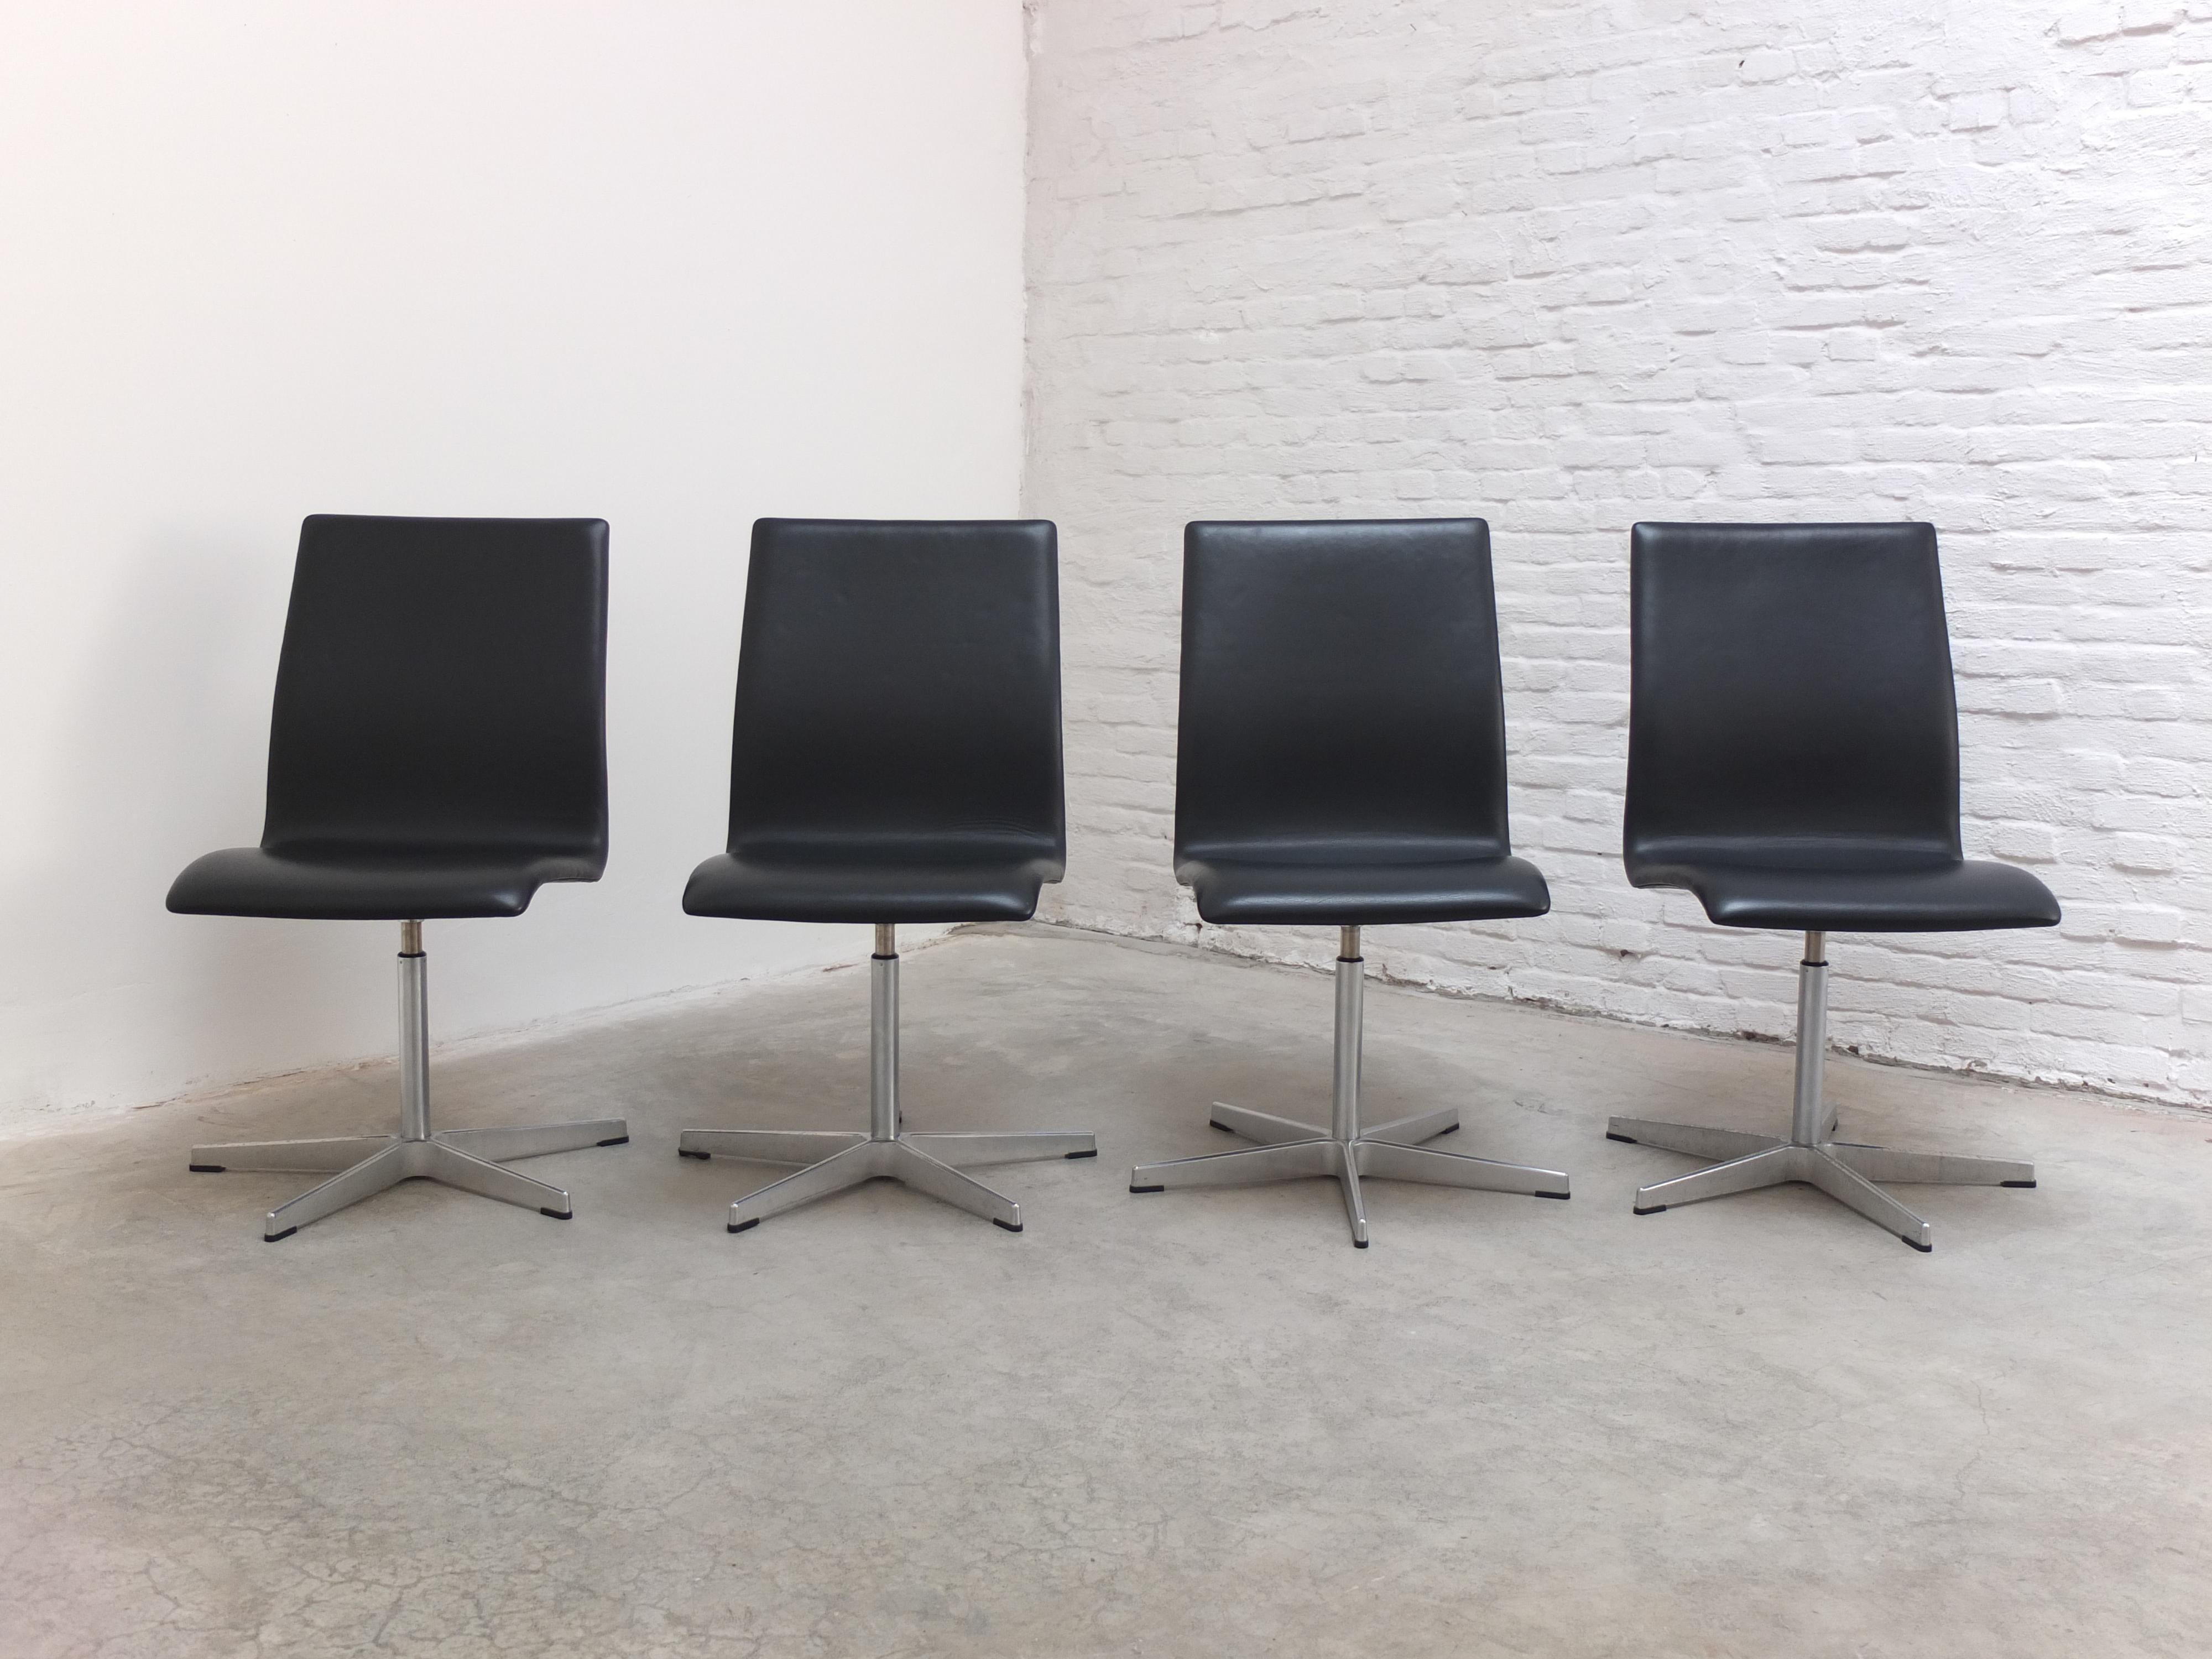 Nice set of 4 ‘Oxford’ swivel chairs designed by Arne Jacobsen in 1965 for the professors of St-Catherine’s college in Oxford. These examples are made of black leather and have the signature Jacobsen aluminum star-shaped base. In very good condition